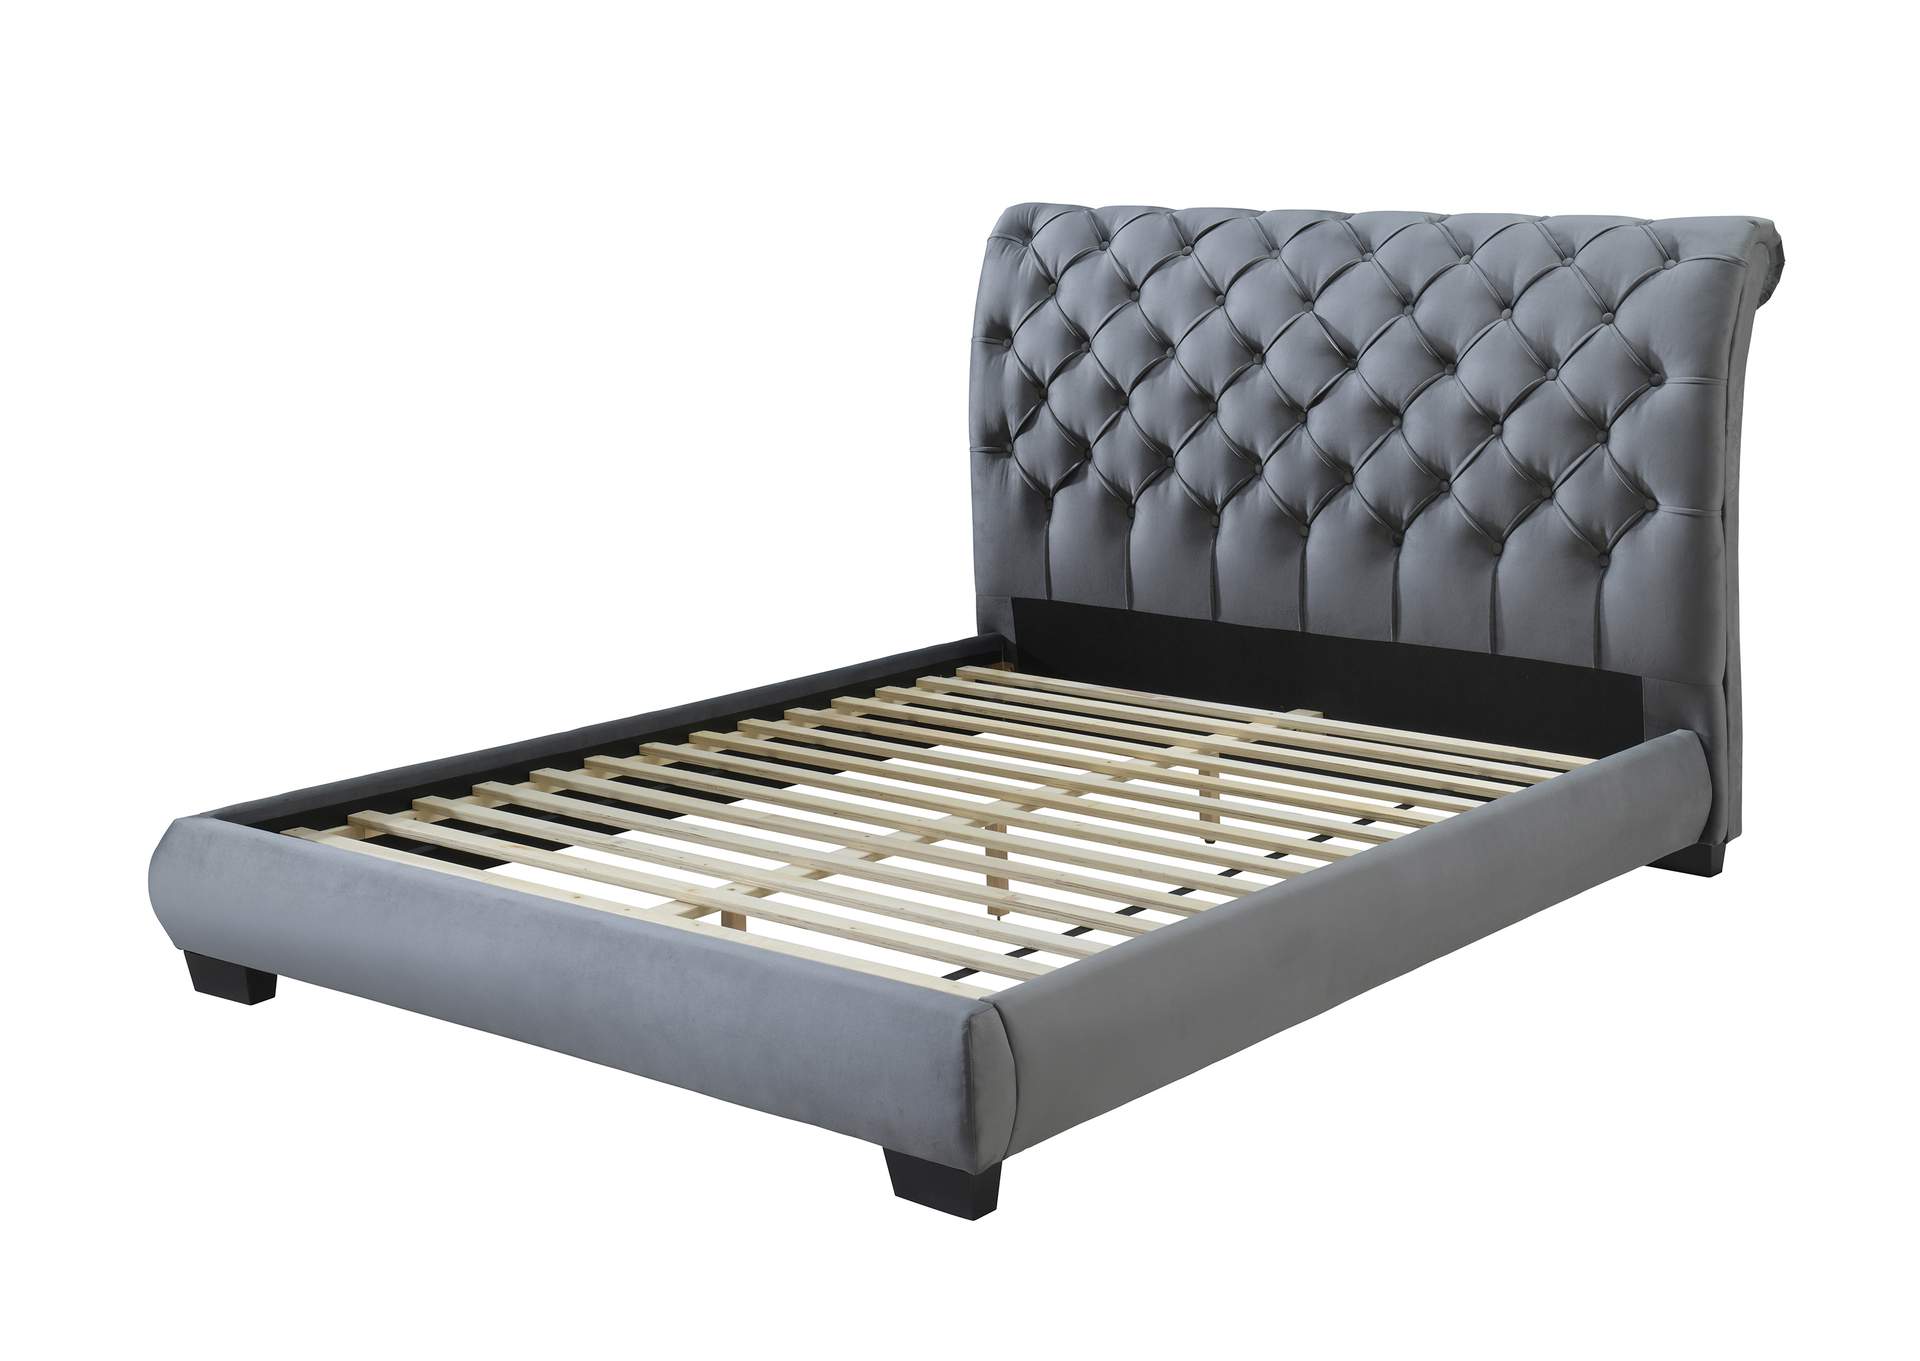 Carly Queen Hbfb Platform Bed,Crown Mark